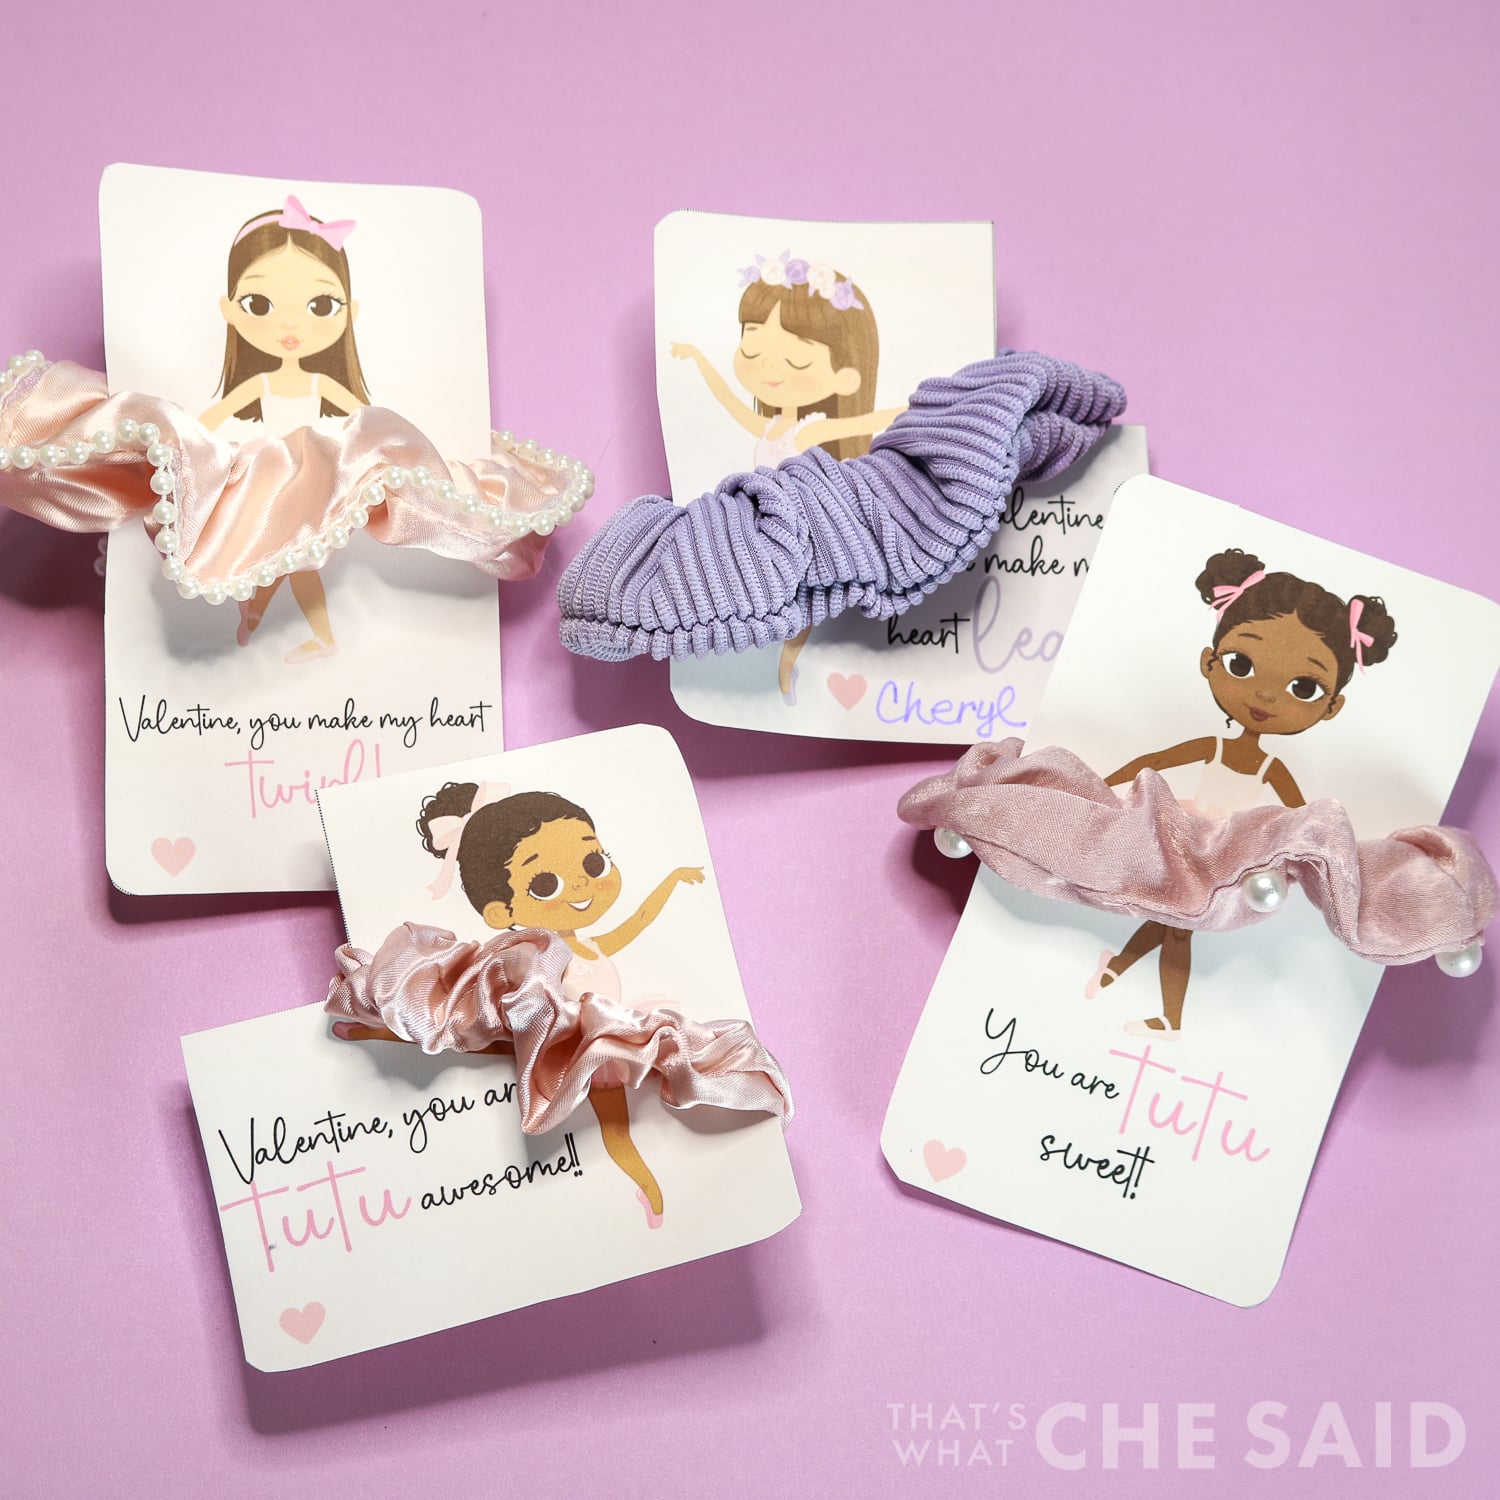 Free printable ballerina cards in square format.